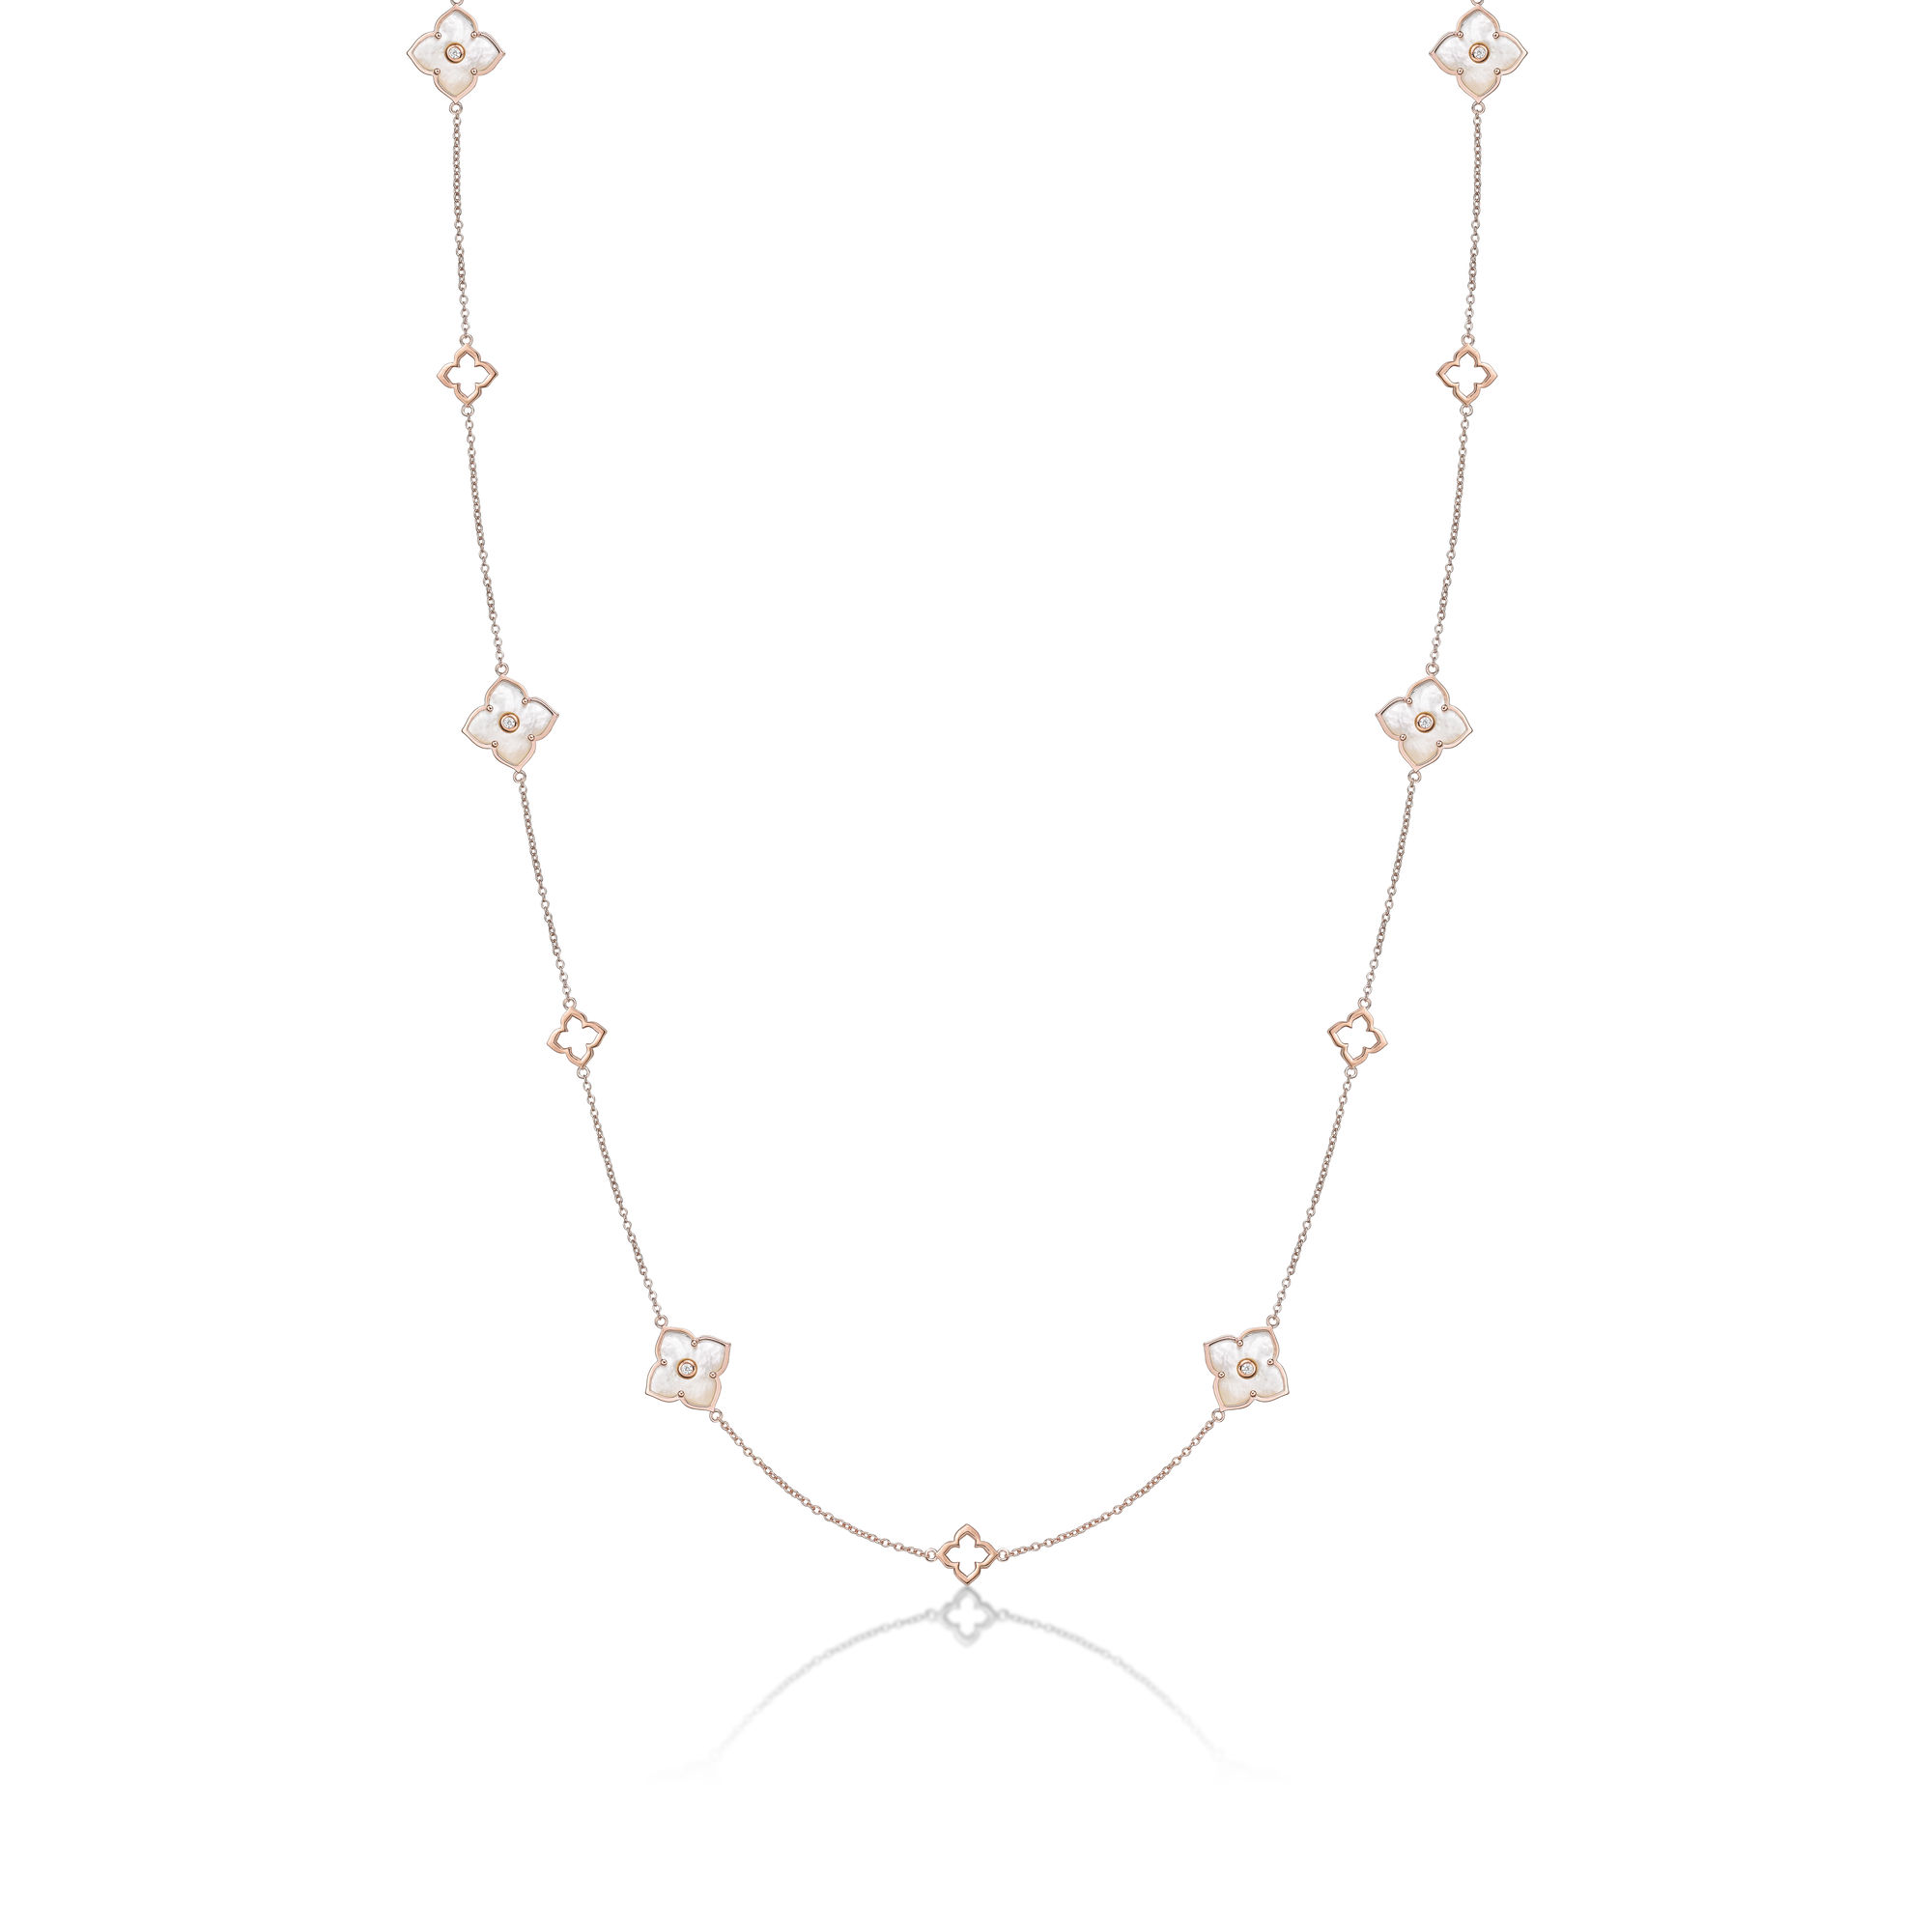 48777-necklace-fashion-jewelry-sterling-silver-48777-2.jpg